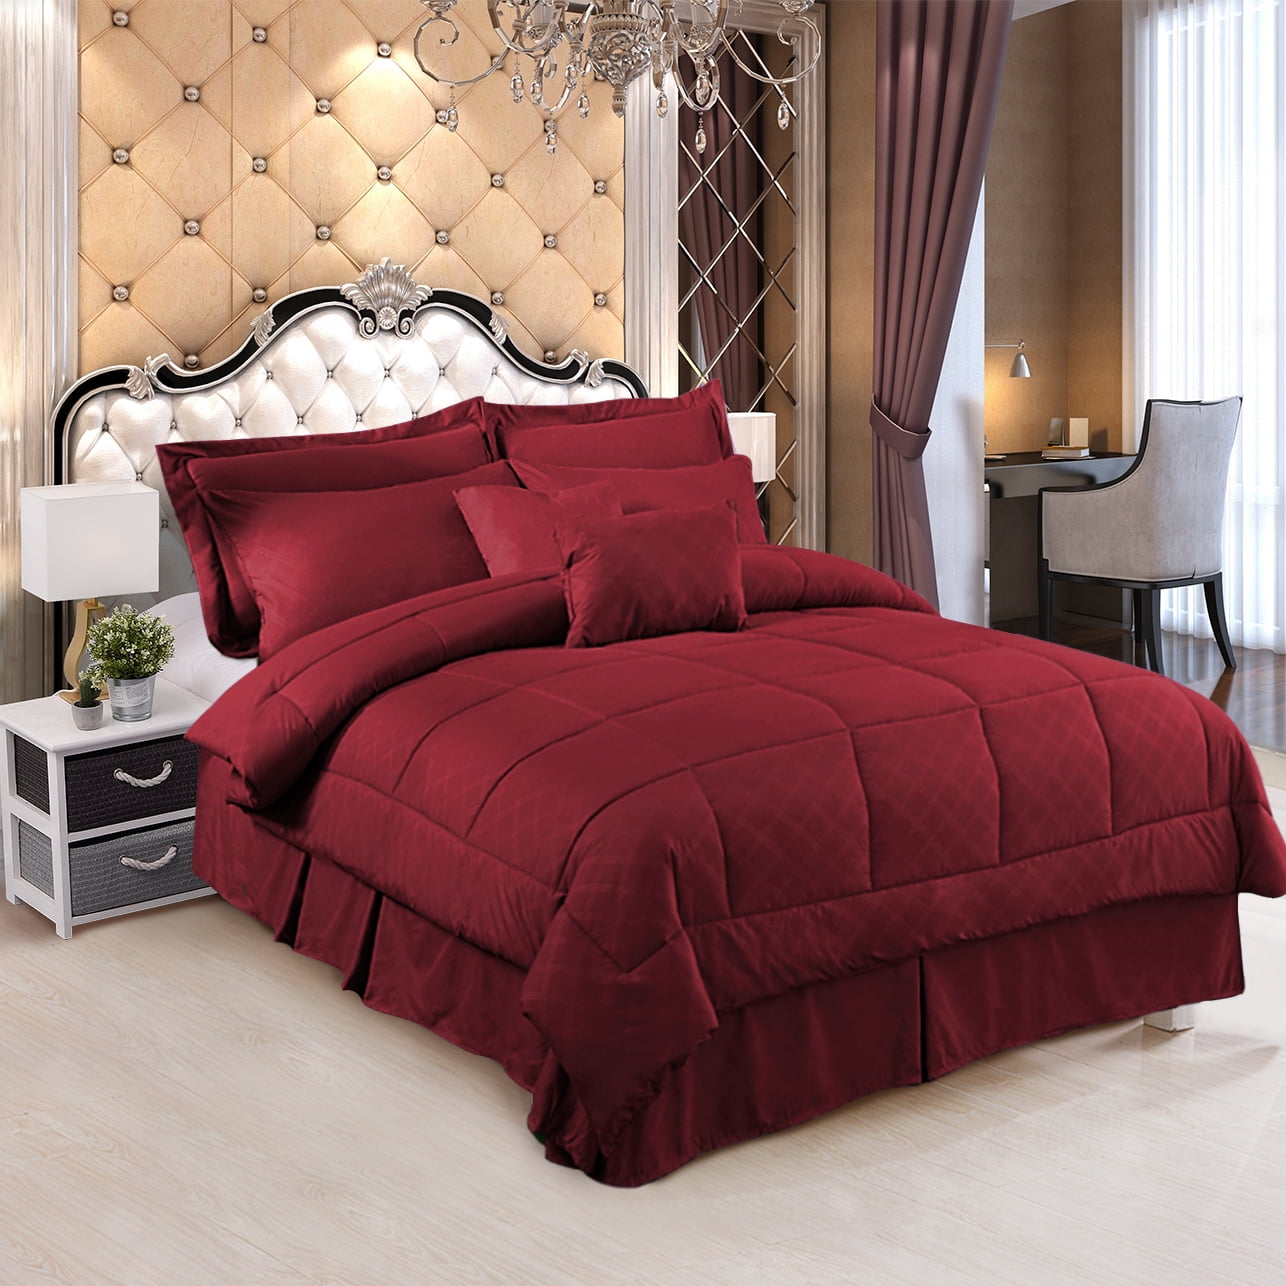 New 8 Piece Red King Size Comforter Set Bedspread Bed in a Bag Bedding Sheets 